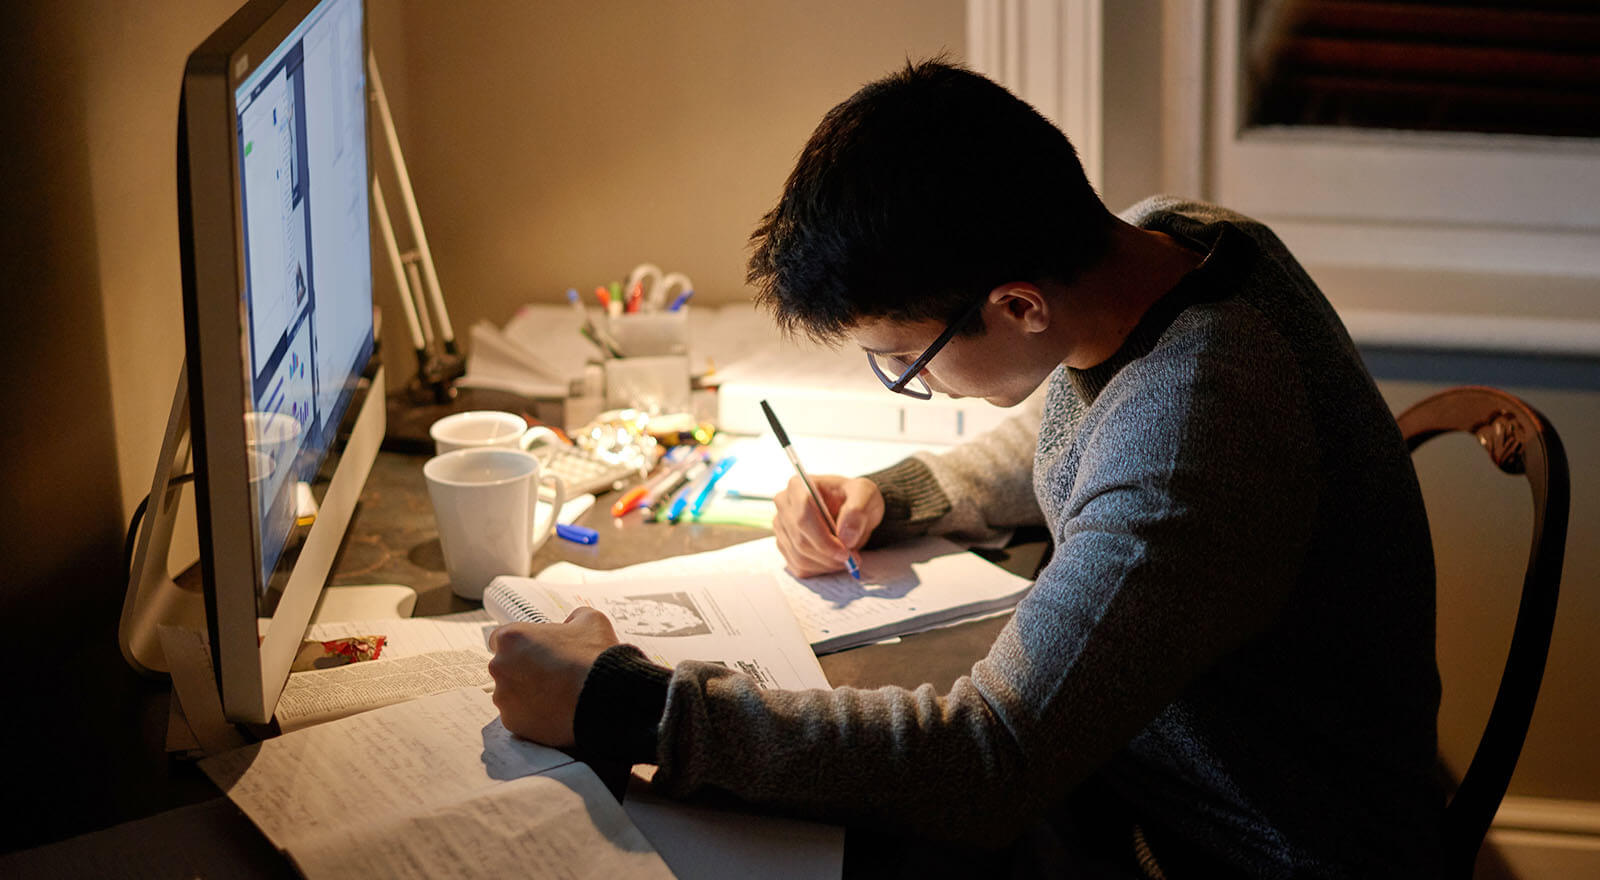 Medical student studying at night